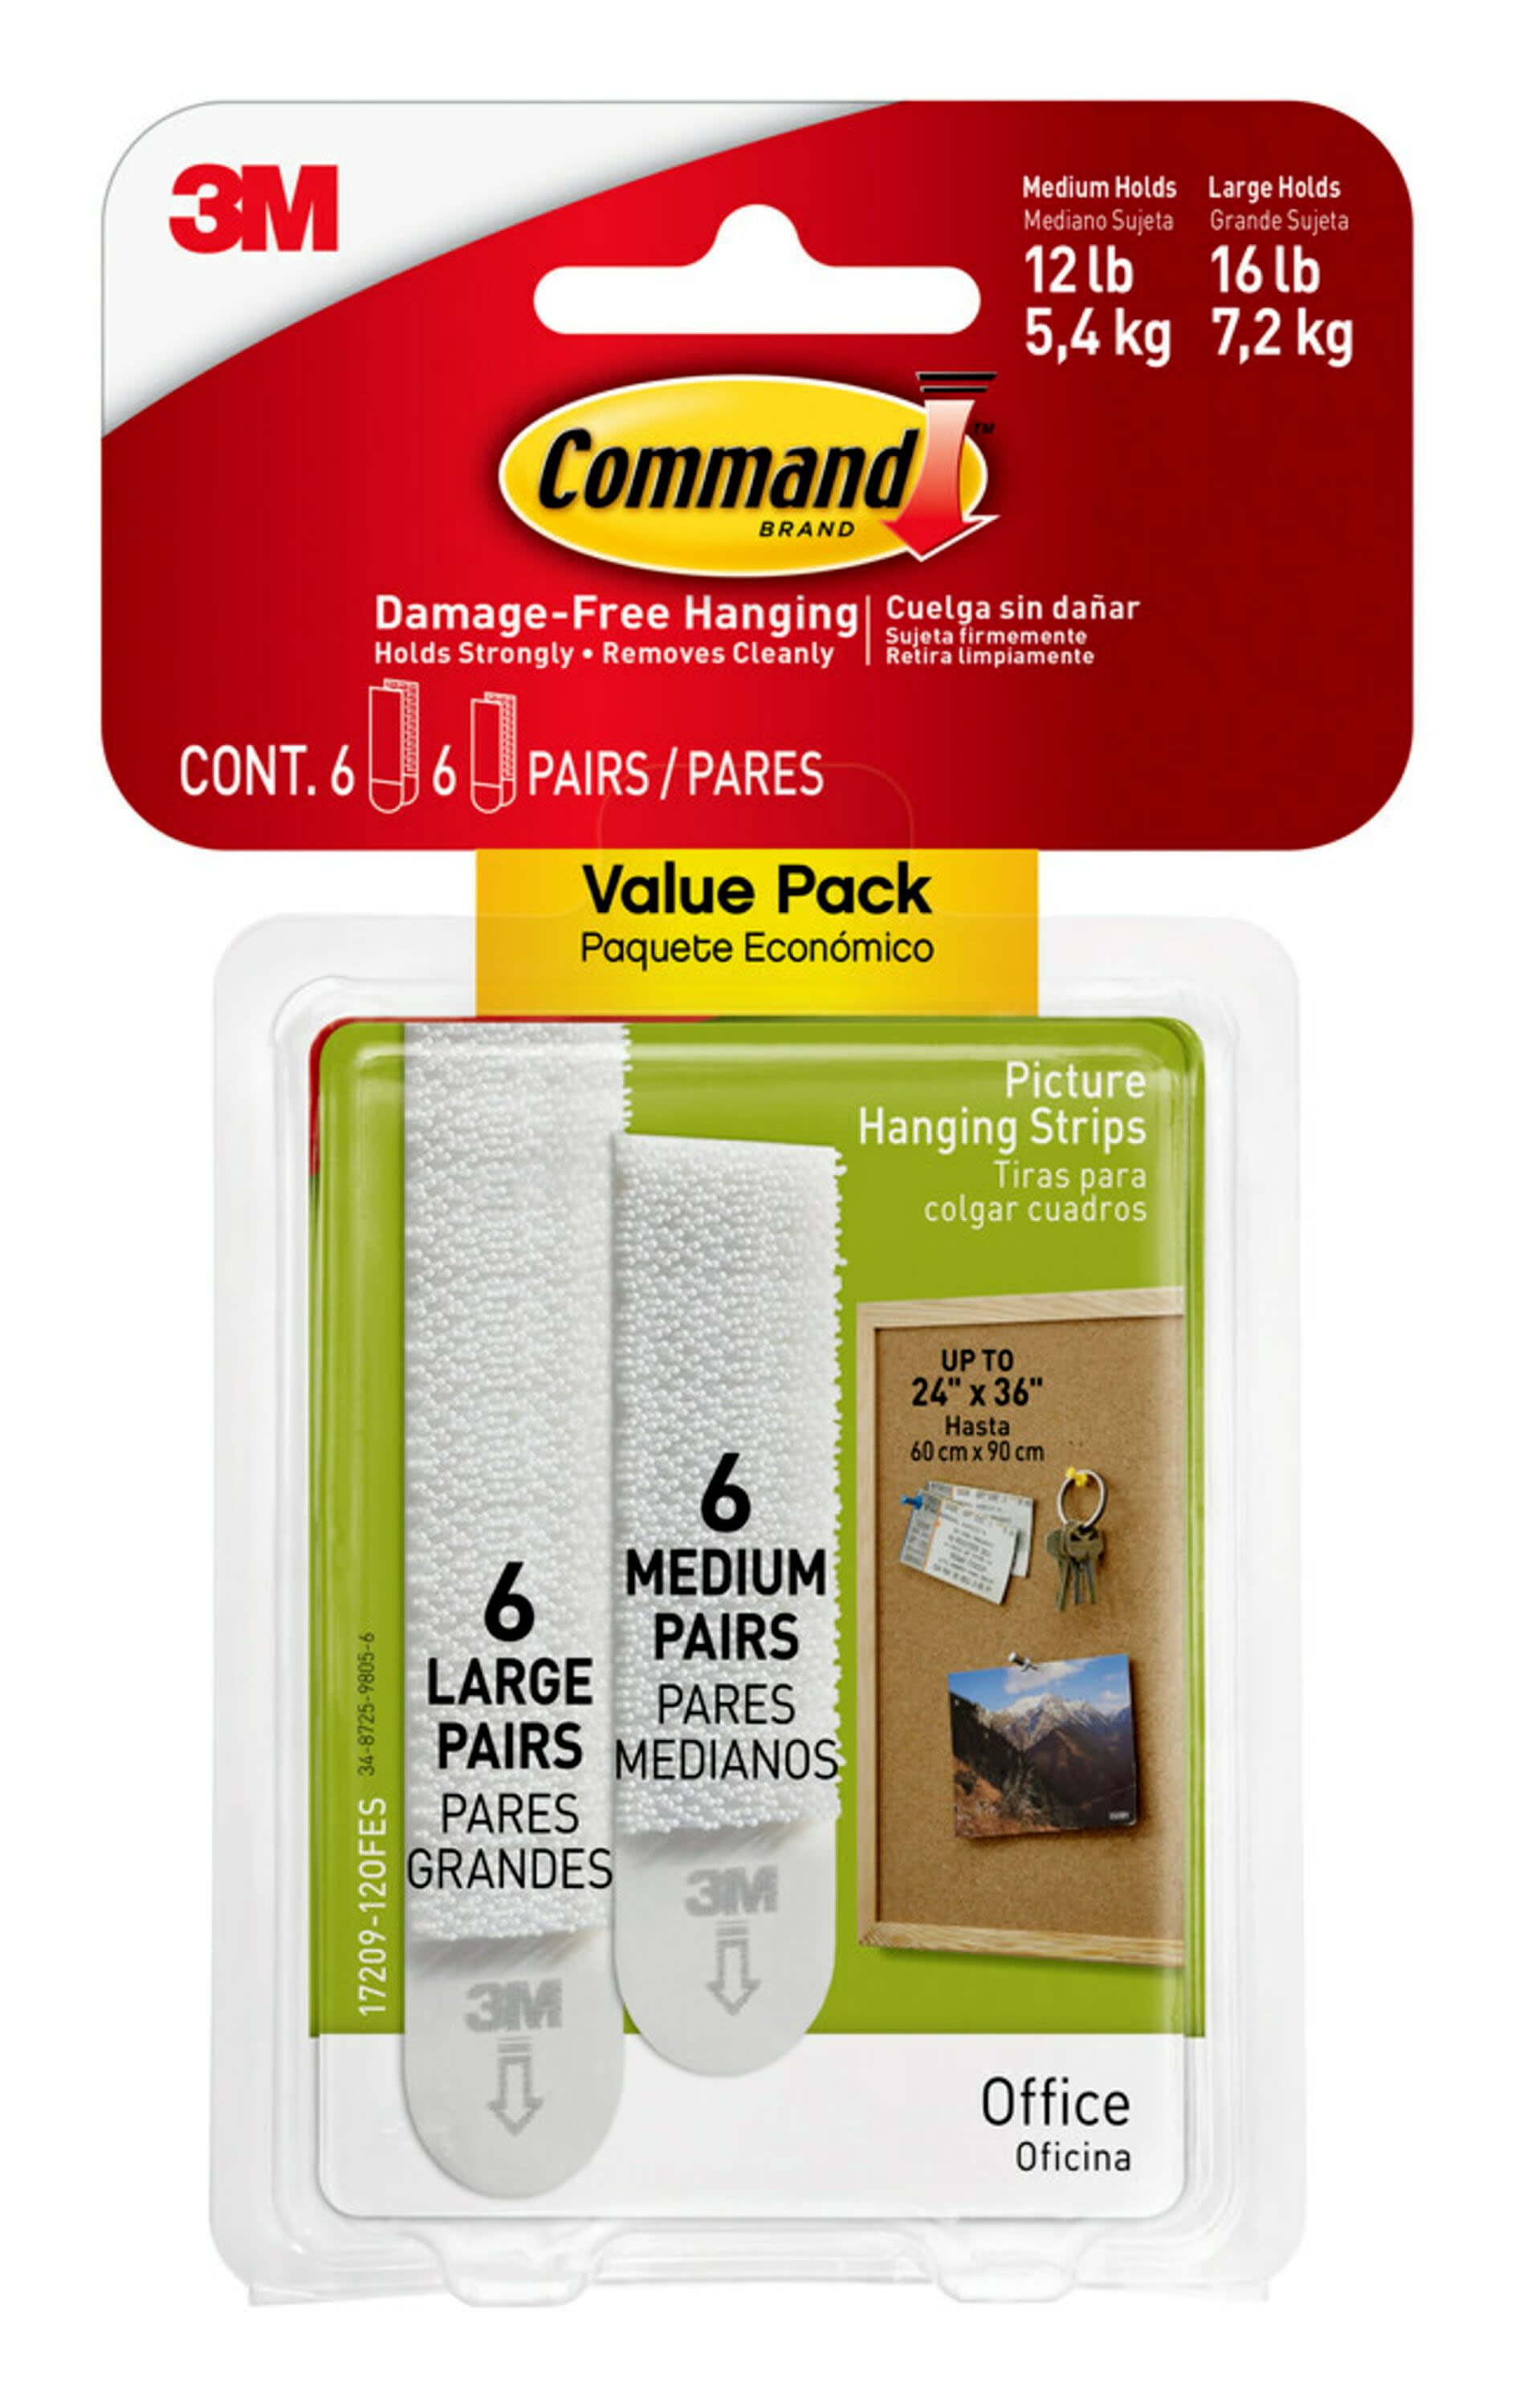 2xPacks 3M Command Picture Hanging Strips Medium 8 STRIPS Pack of 4 x 2 